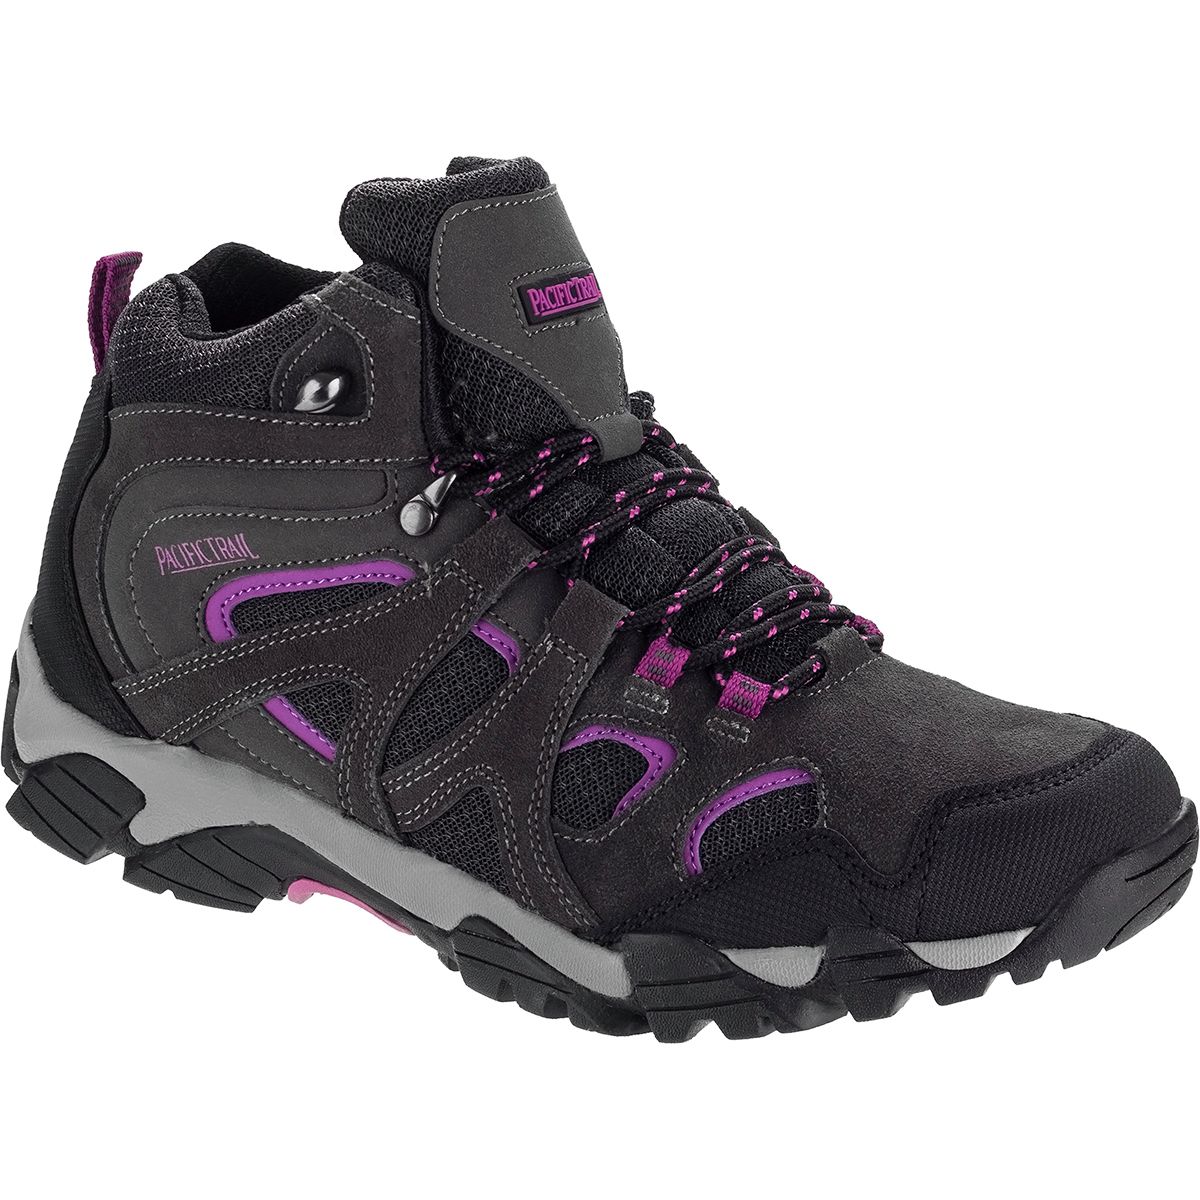 Pacific Trail Diller Hiking Boot 